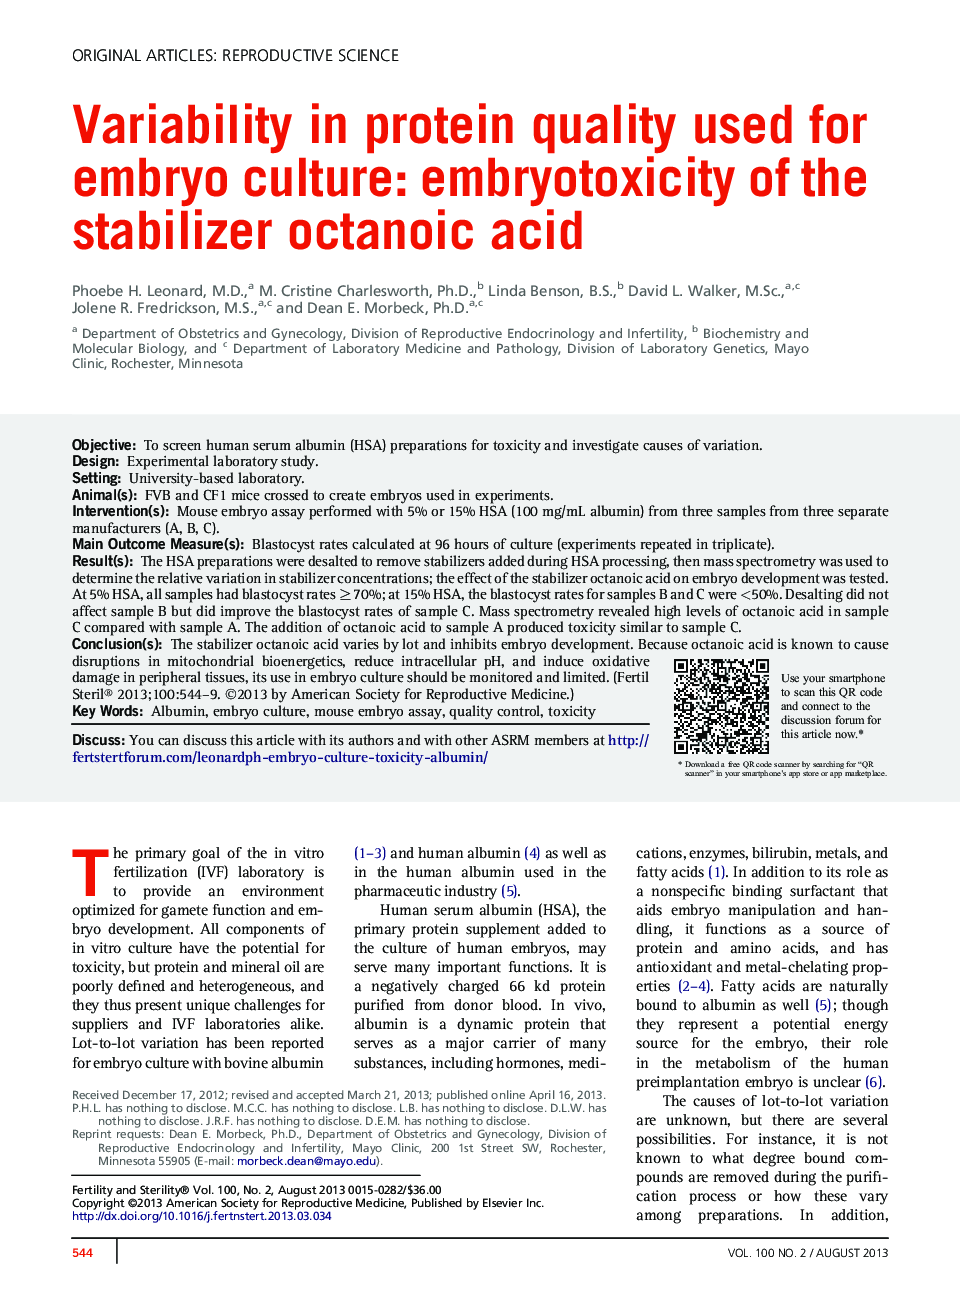 Variability in protein quality used for embryo culture: embryotoxicity of the stabilizer octanoic acid 